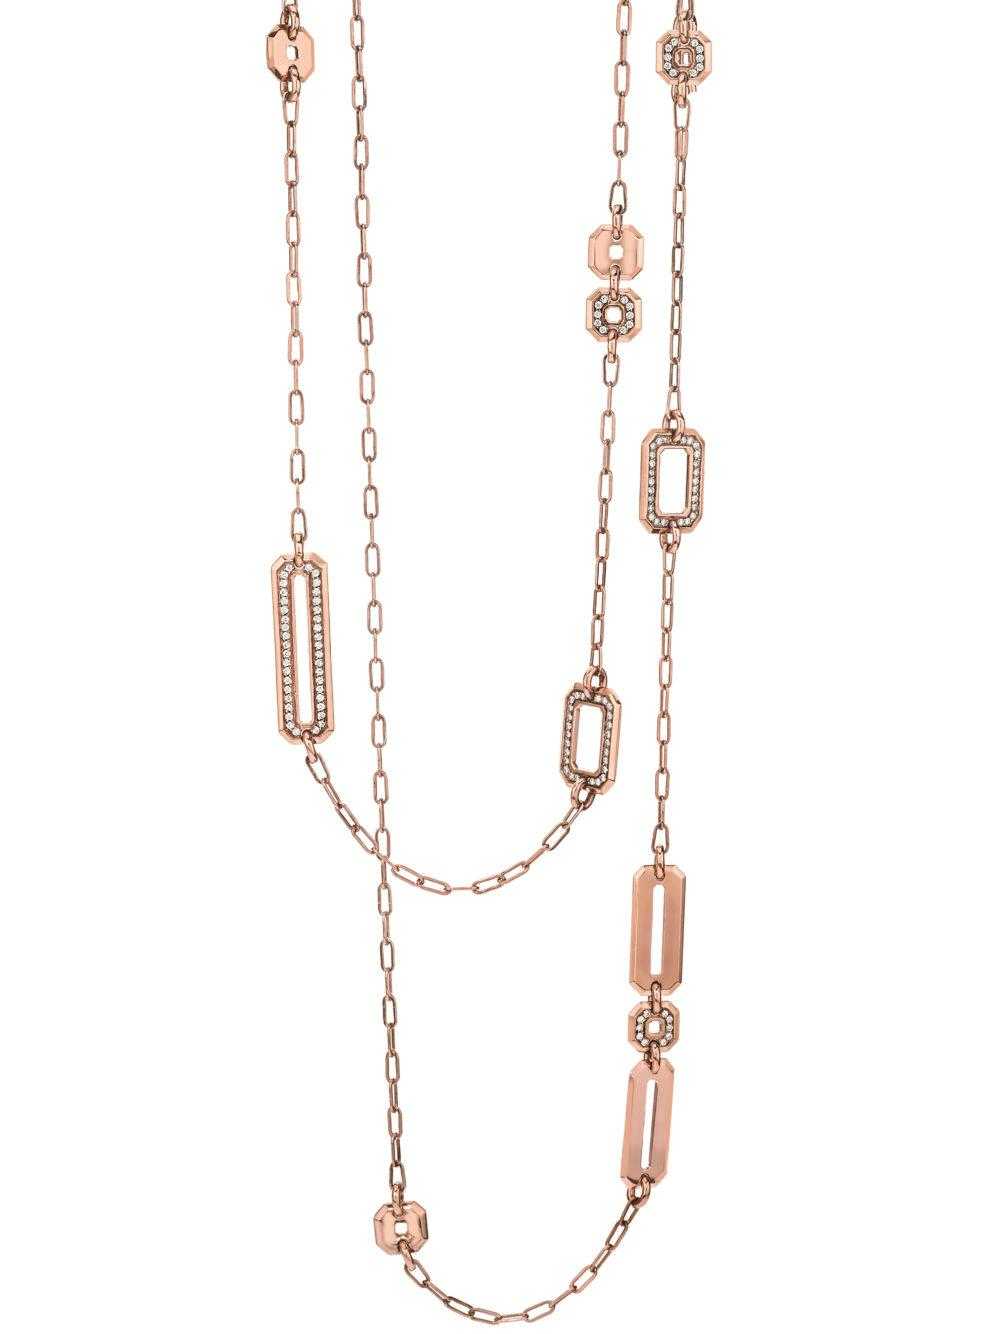 rose-gold-deco-chain-necklace-high-end-jewelry-luxury-jewelry-hammerman-jewels